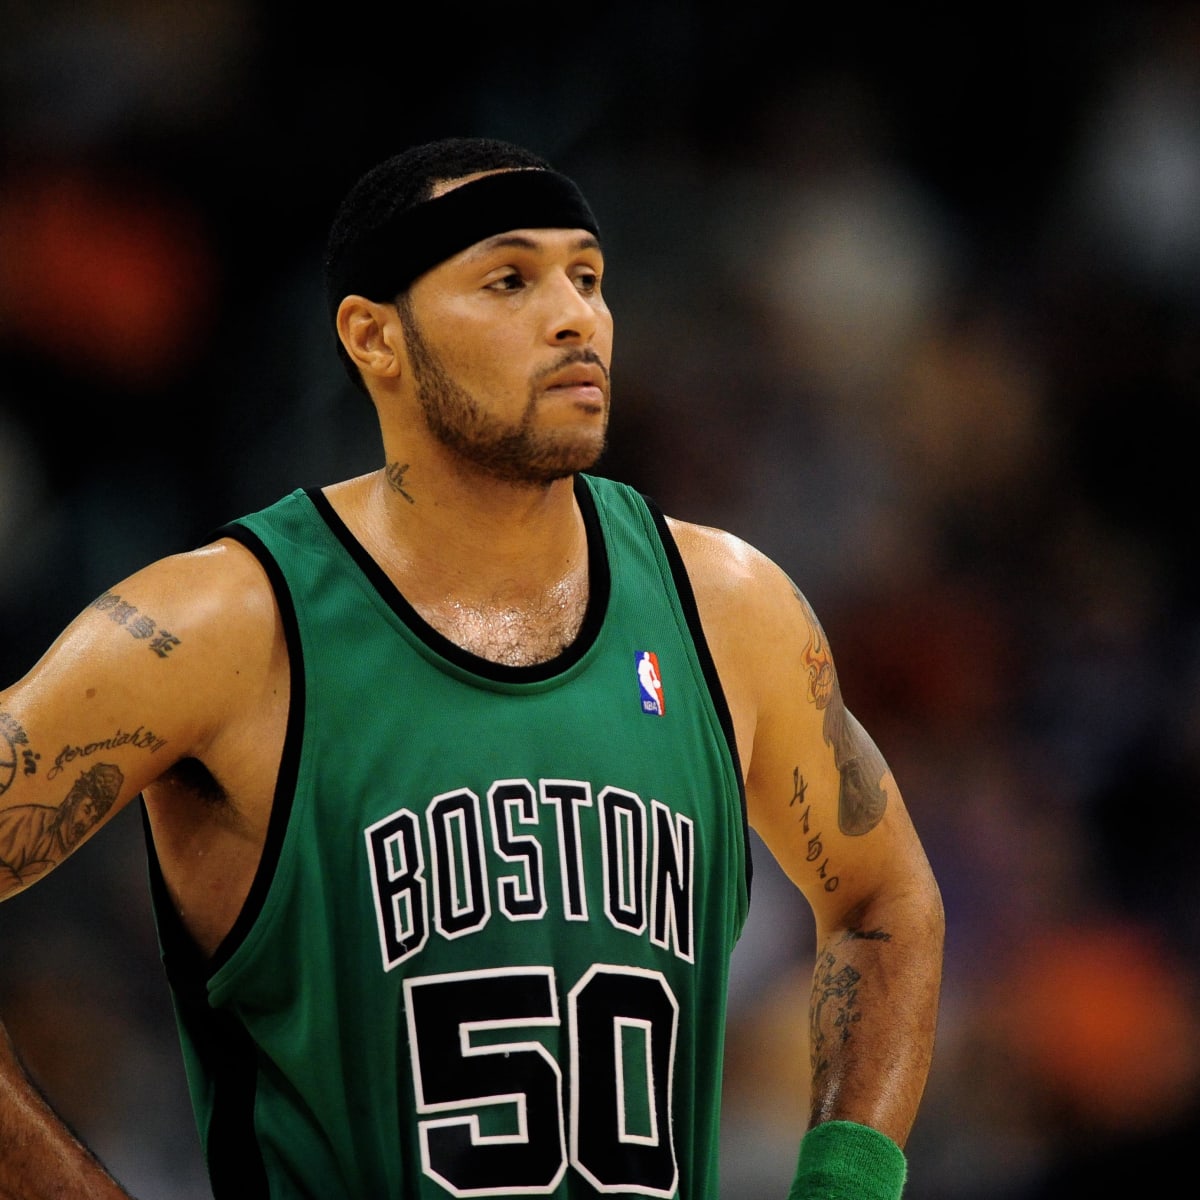 As he did with Celtics, Eddie House has fit right in as analyst